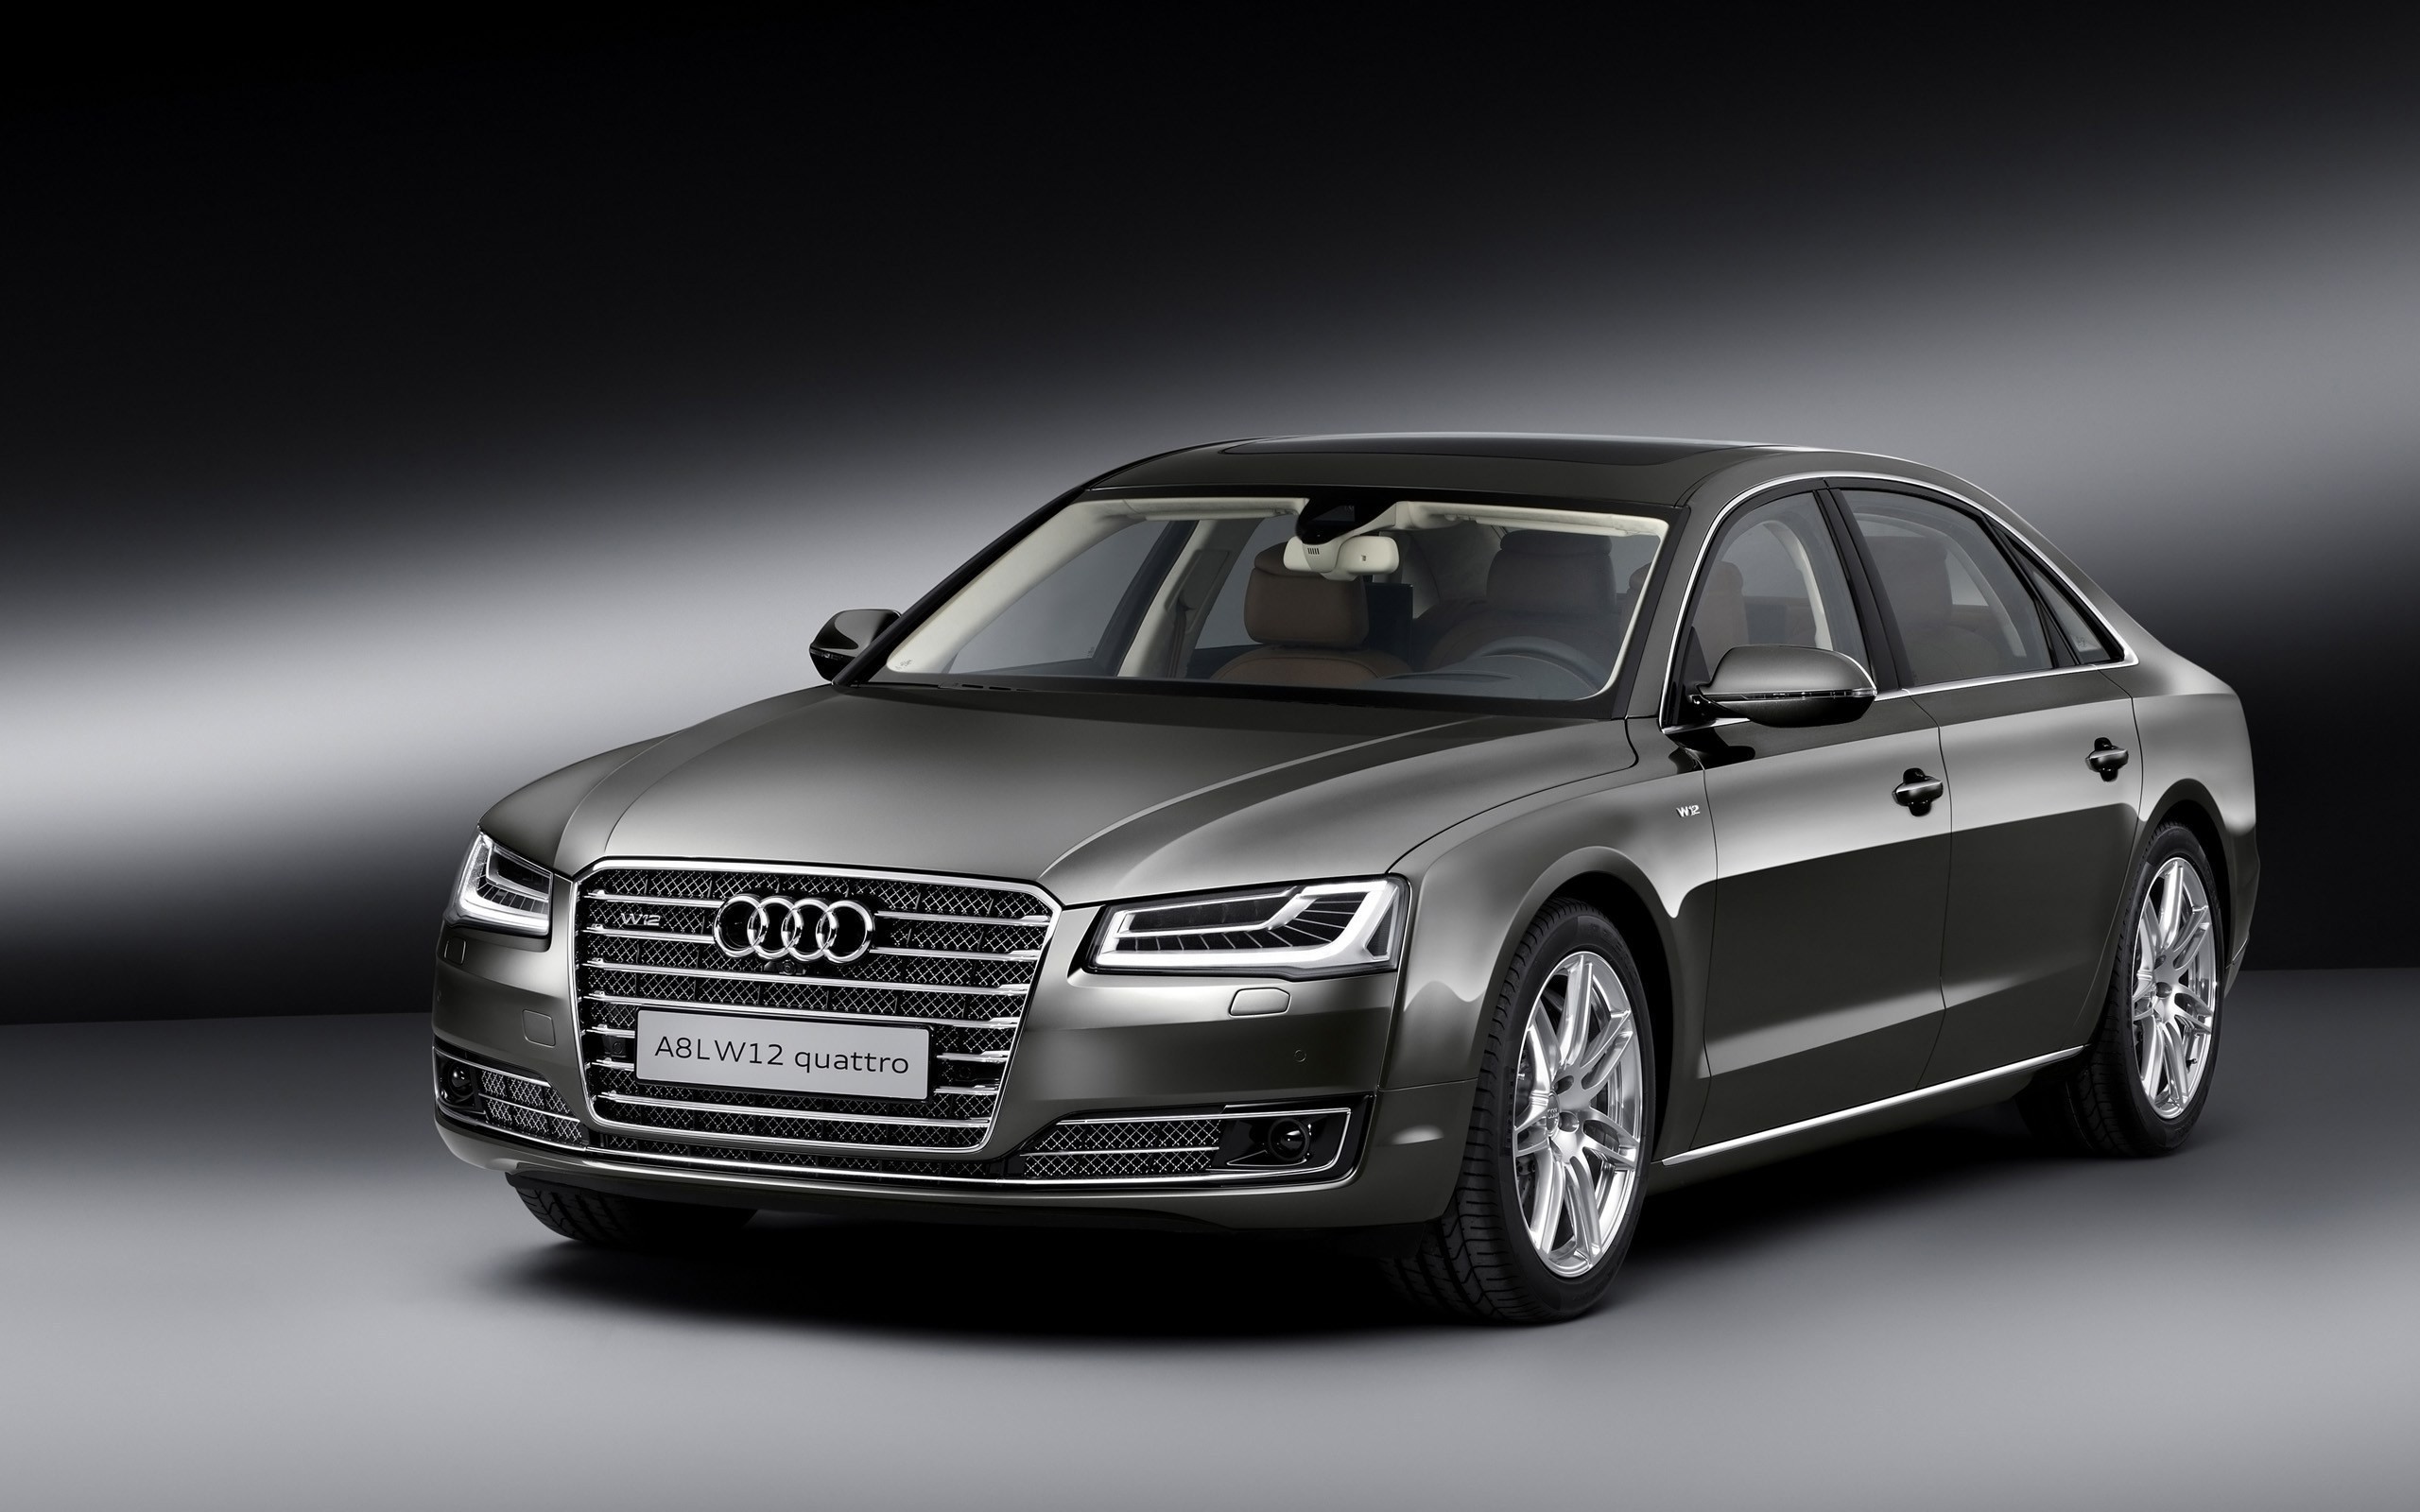 2560x1600 Audi A8 L W12 Exclusive 2014 Wallpaper Hd Car Wallpapers Id 4095 Android